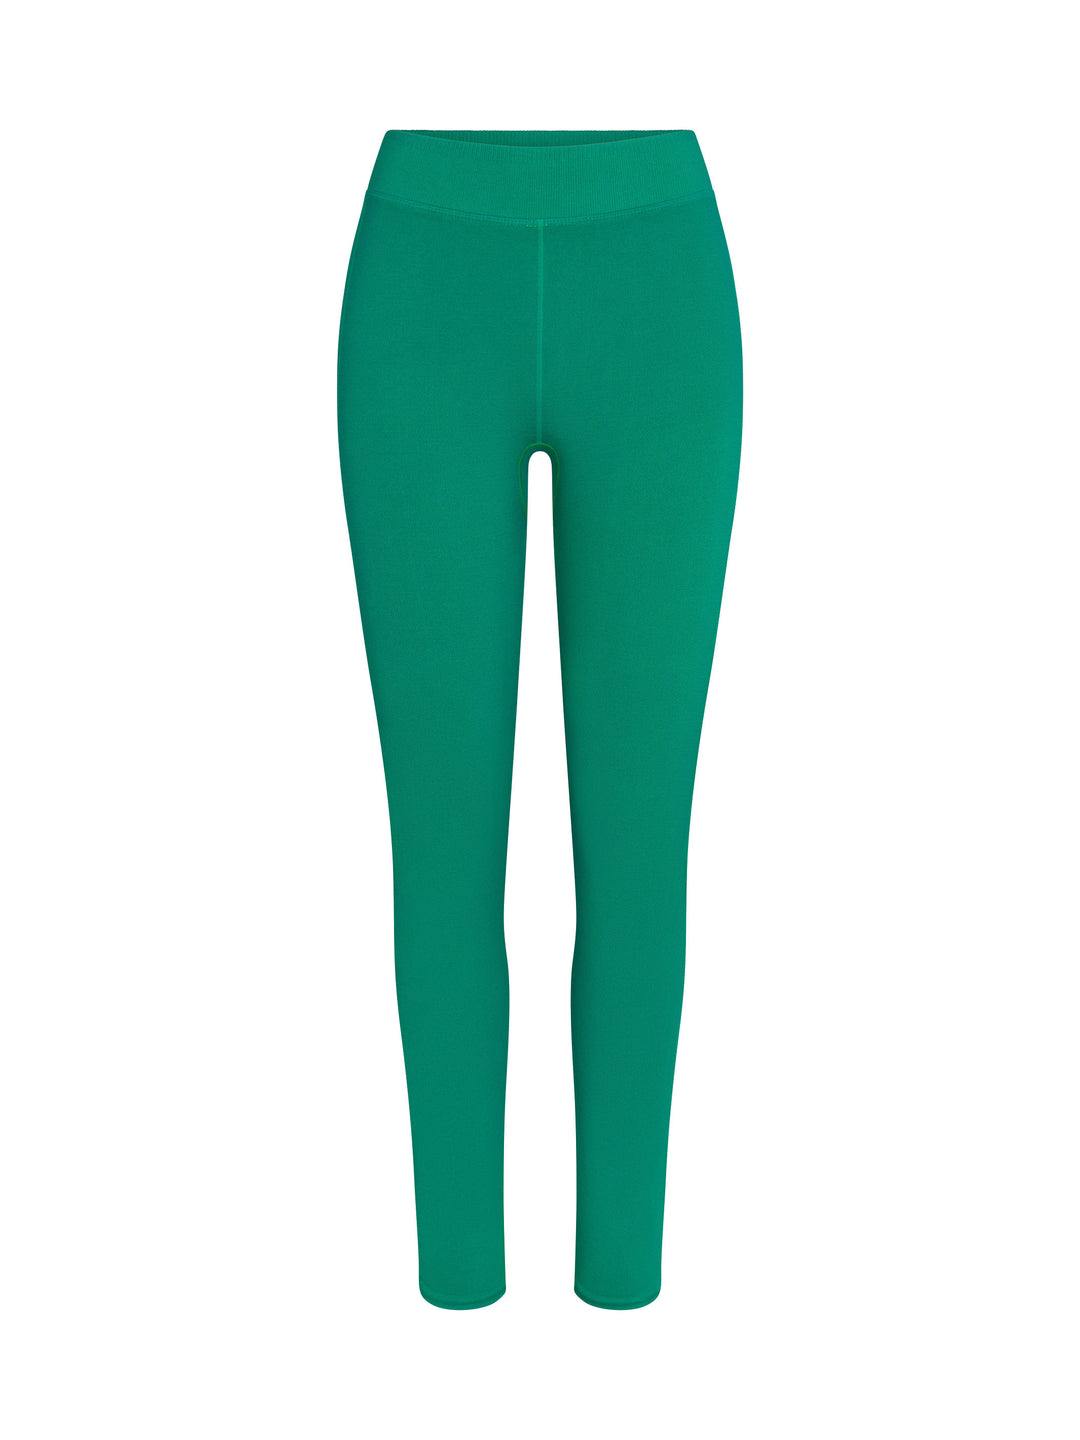 Women's 7/8 Seamless Compression Leggings front view in Jade